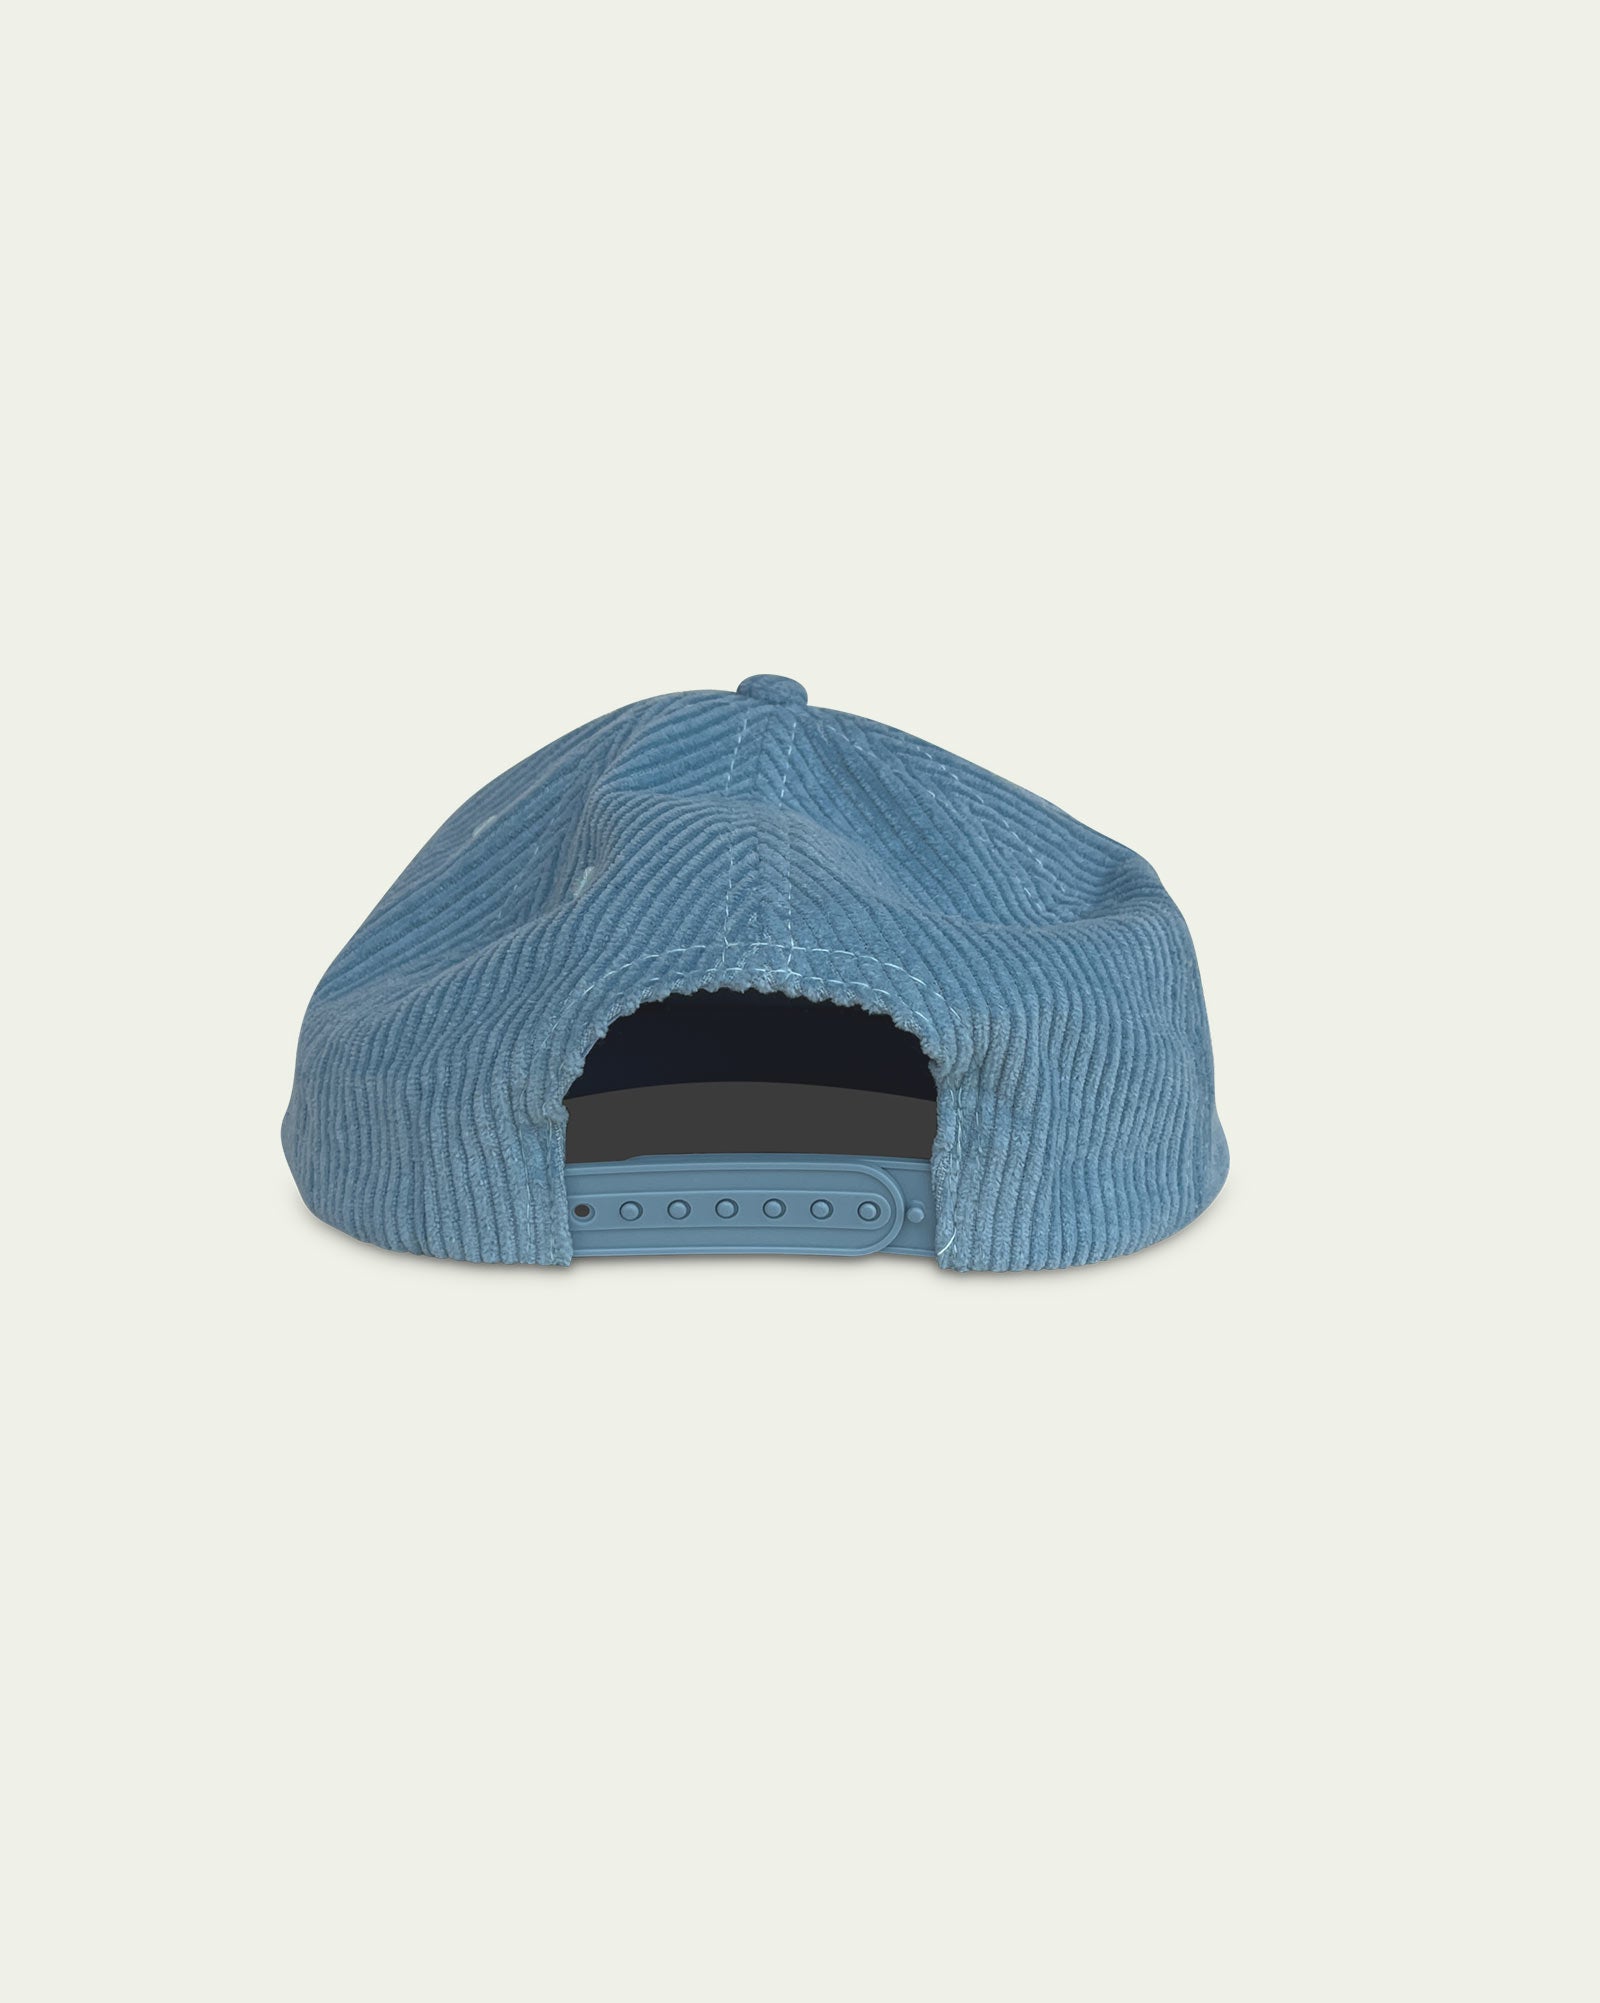 Have A Nice Game® Tennessee Corduroy Snapback Hat